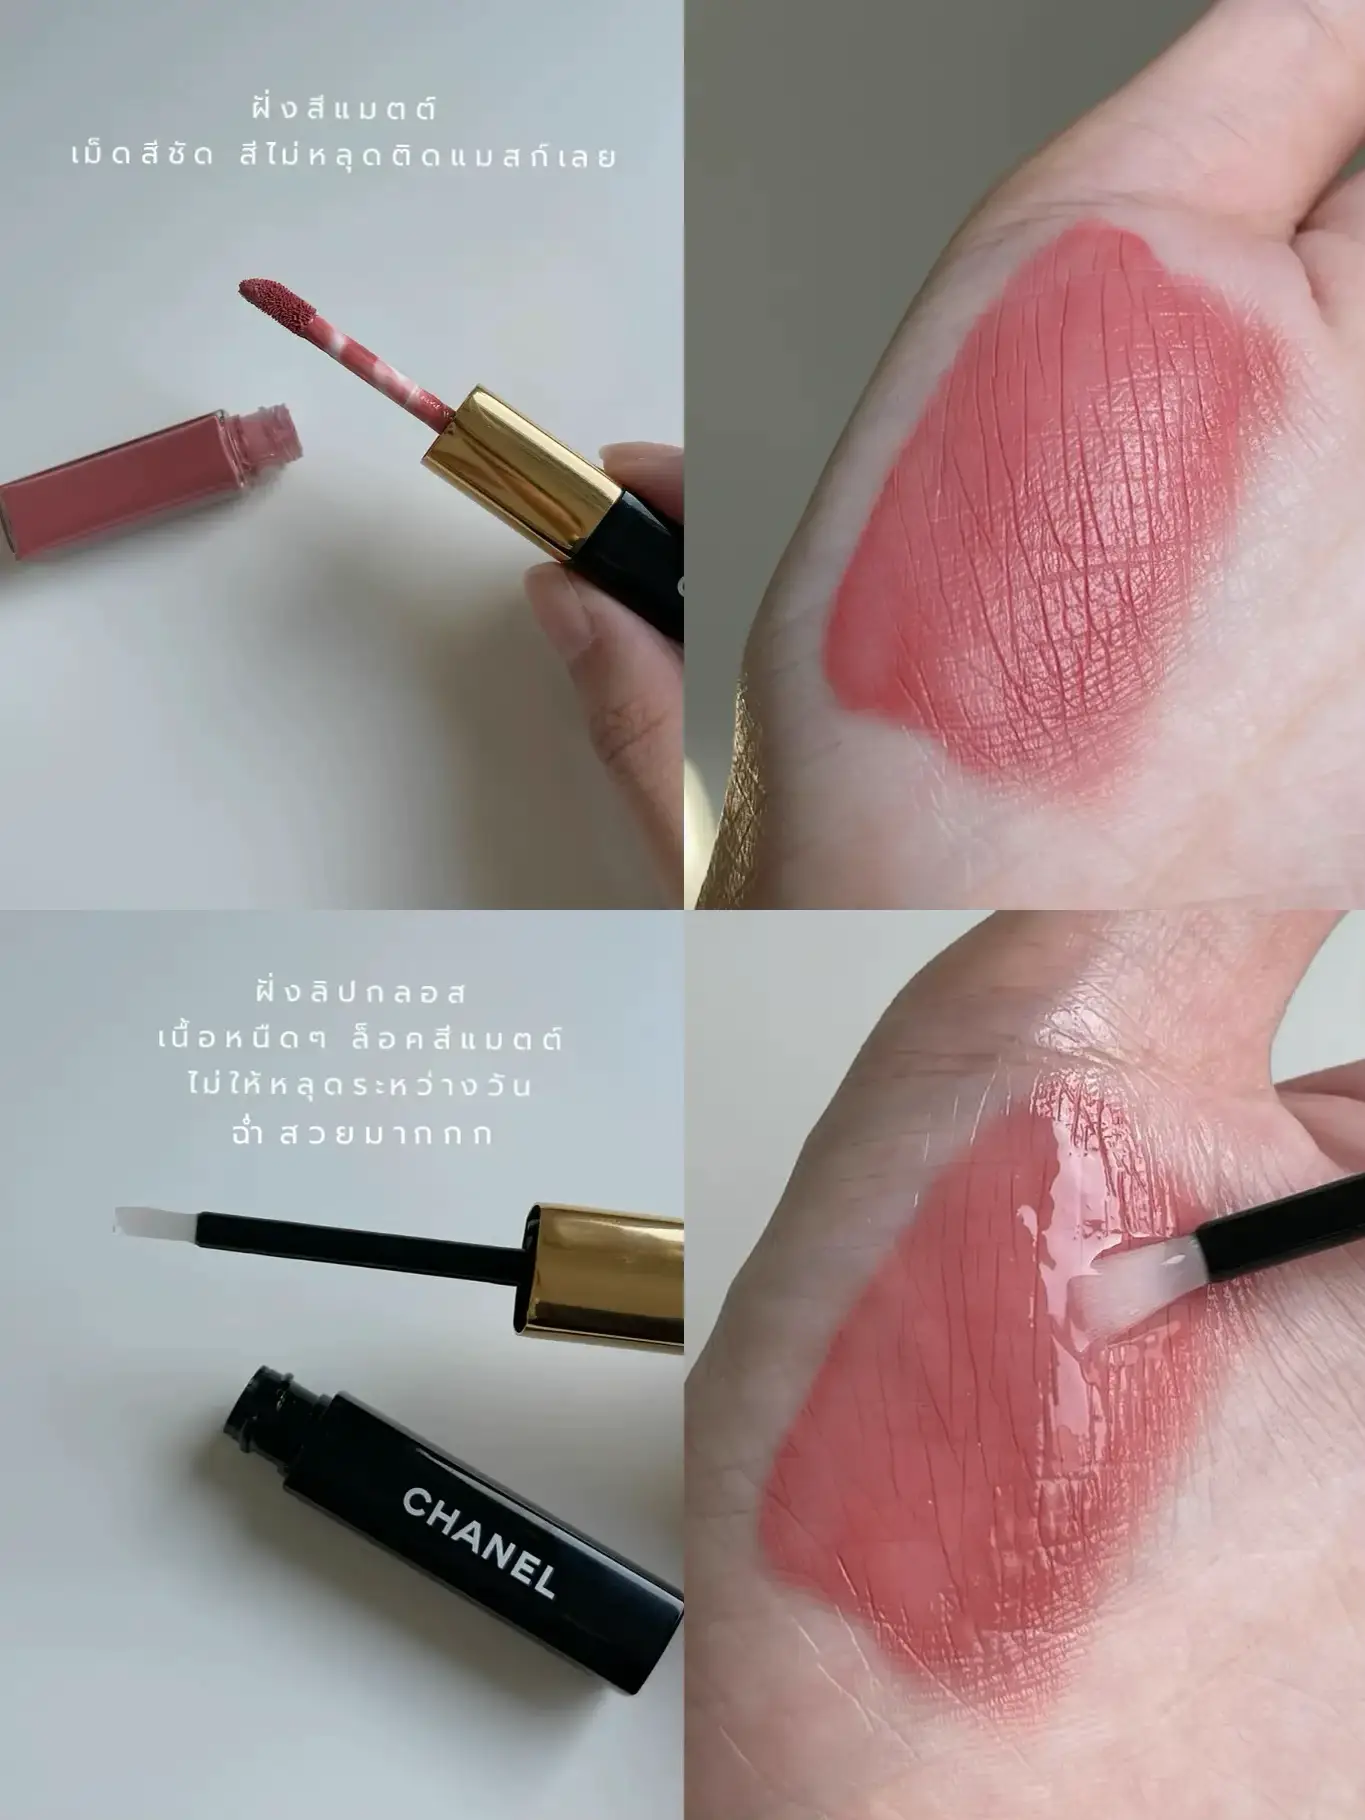 The hit lip chanel is not addicted to mass. How's it actually used